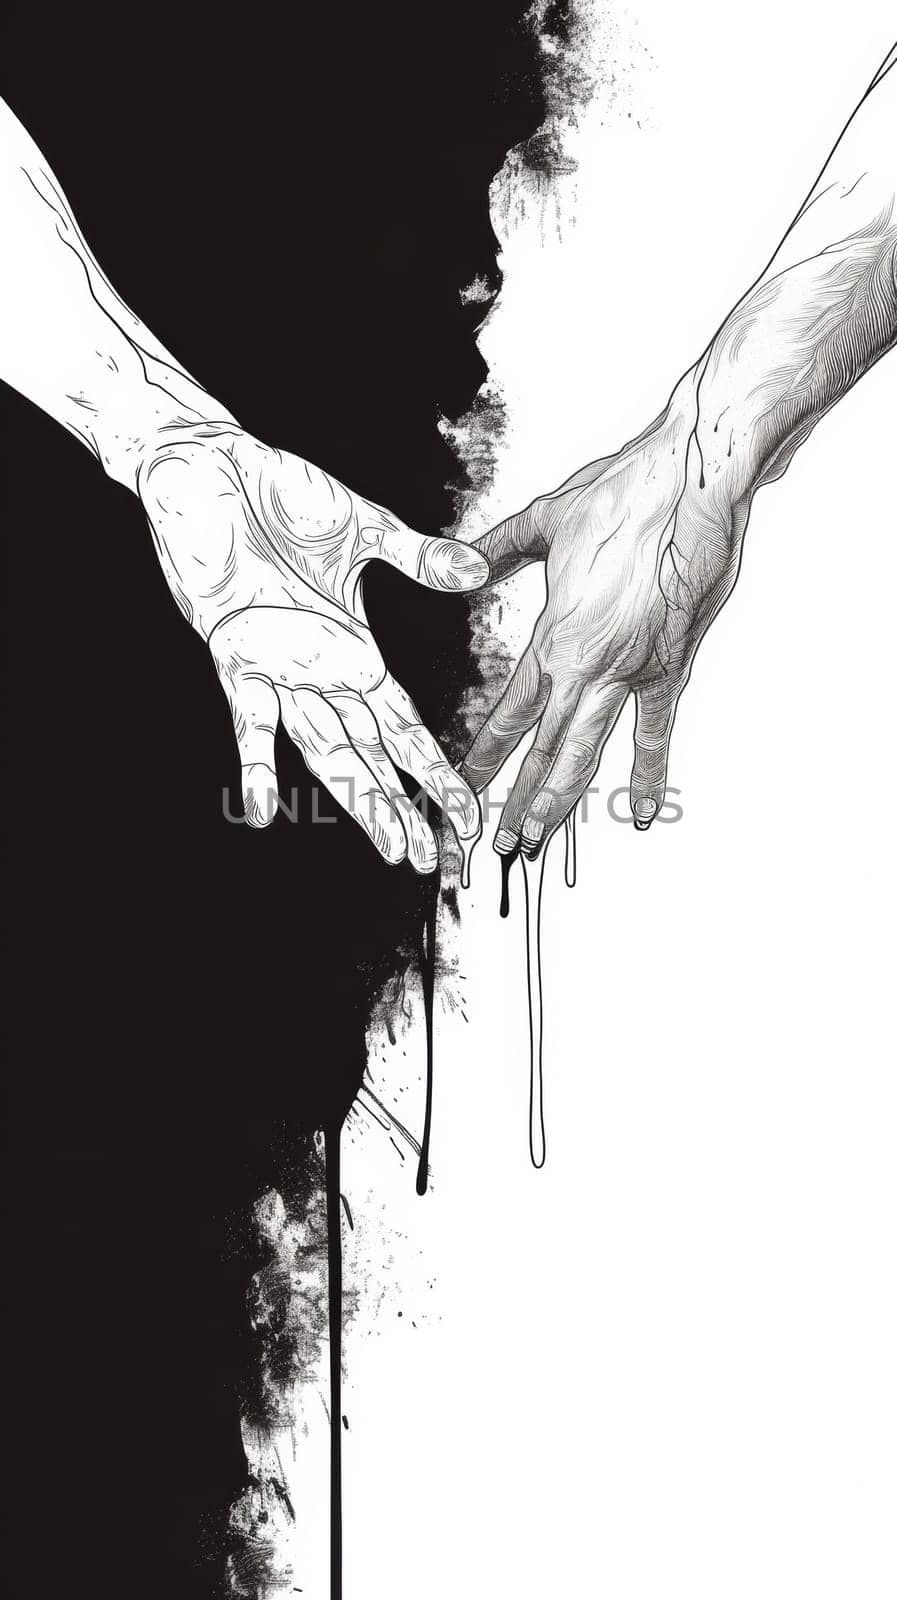 A drawing of two hands reaching for each other with black paint splattered on them